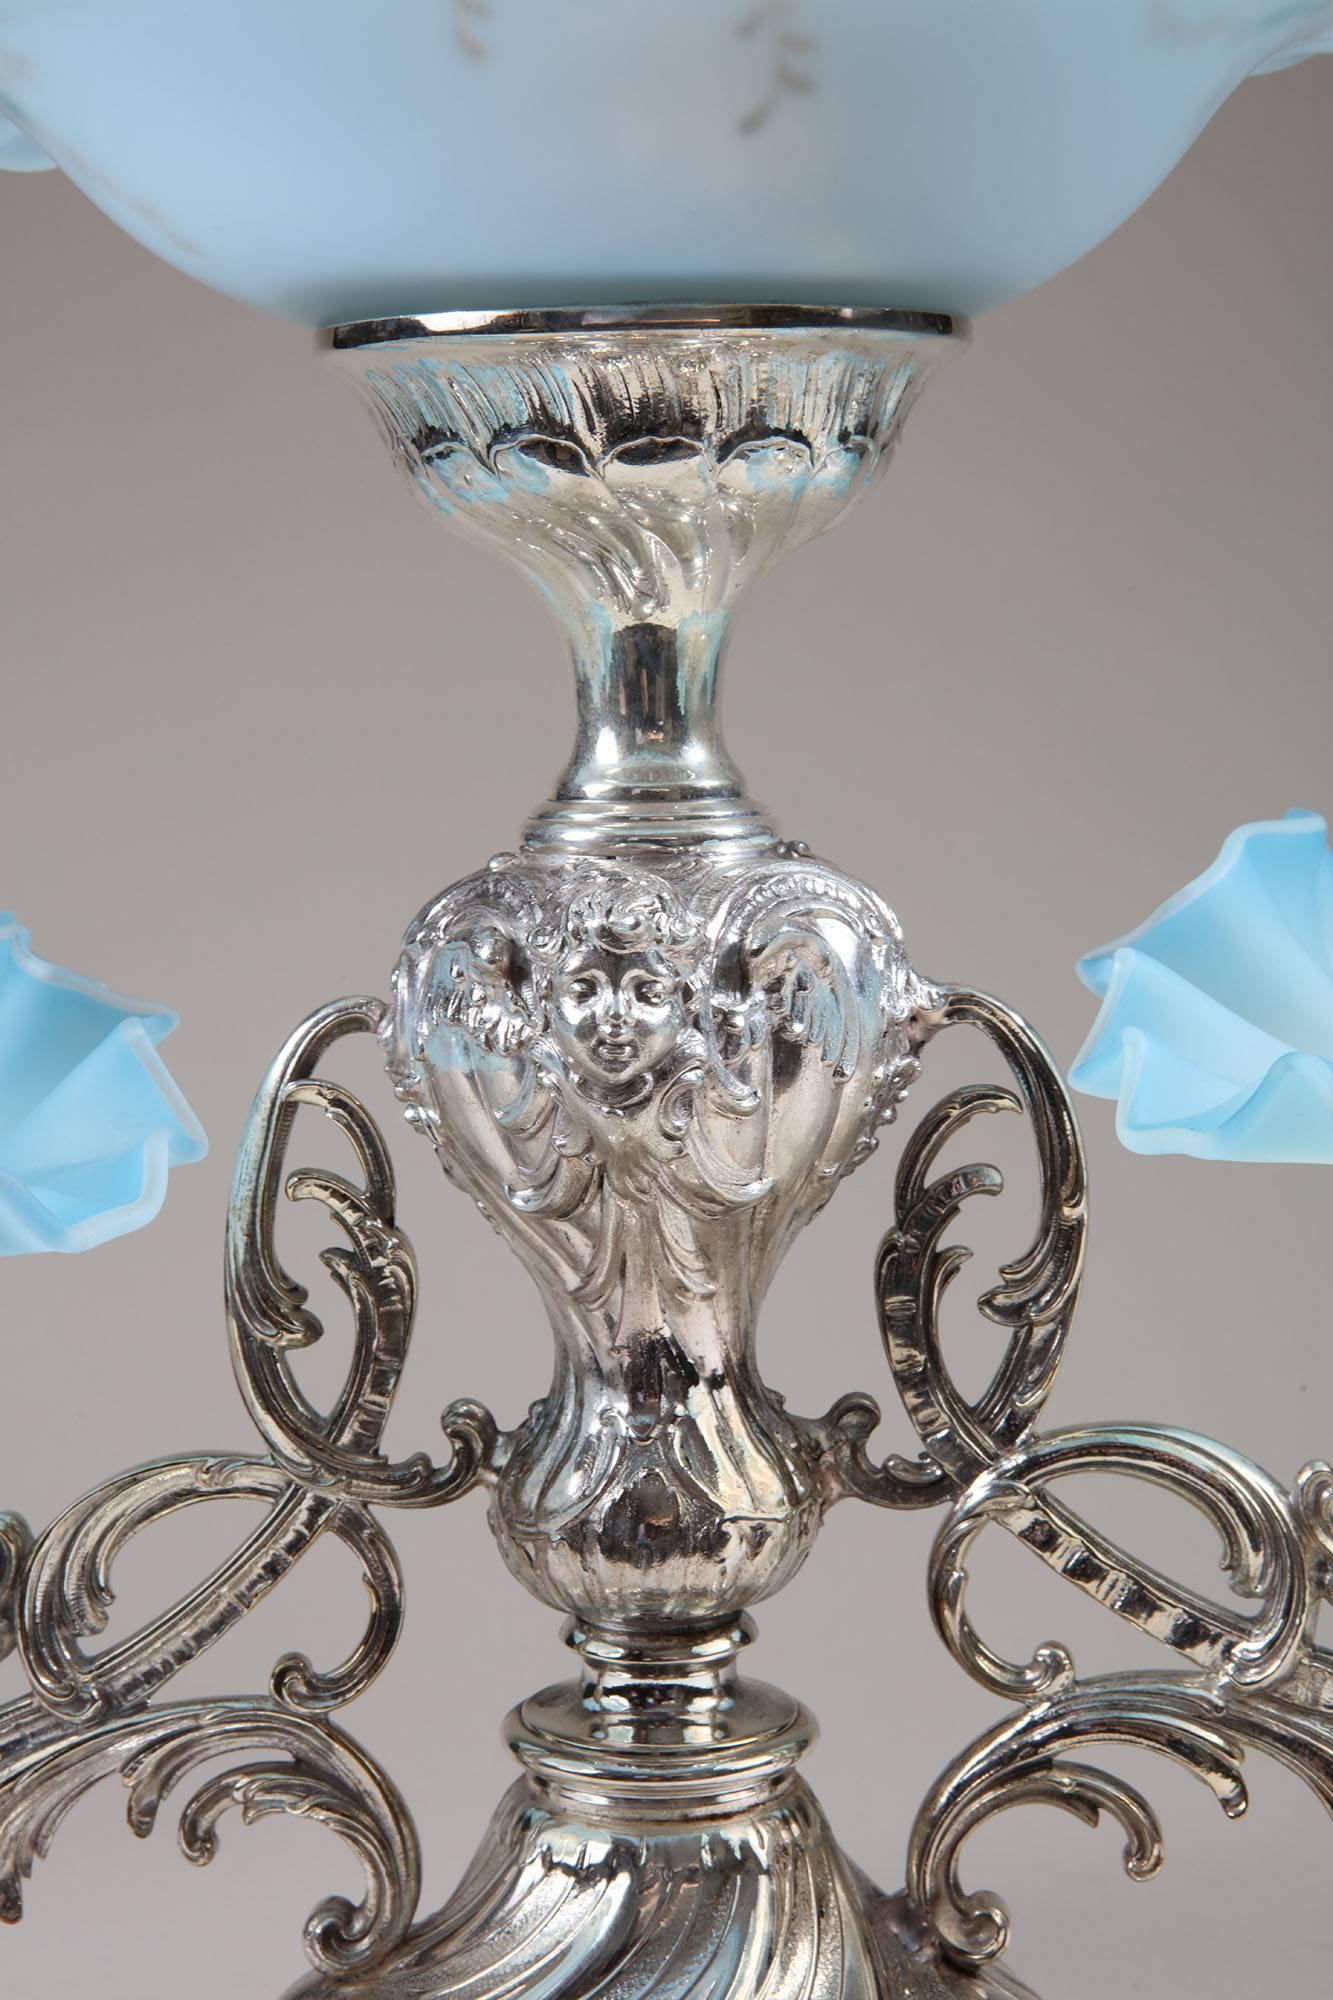 A Silver Plate and Glass Epergne Centrepiece  In Good Condition In London, by appointment only